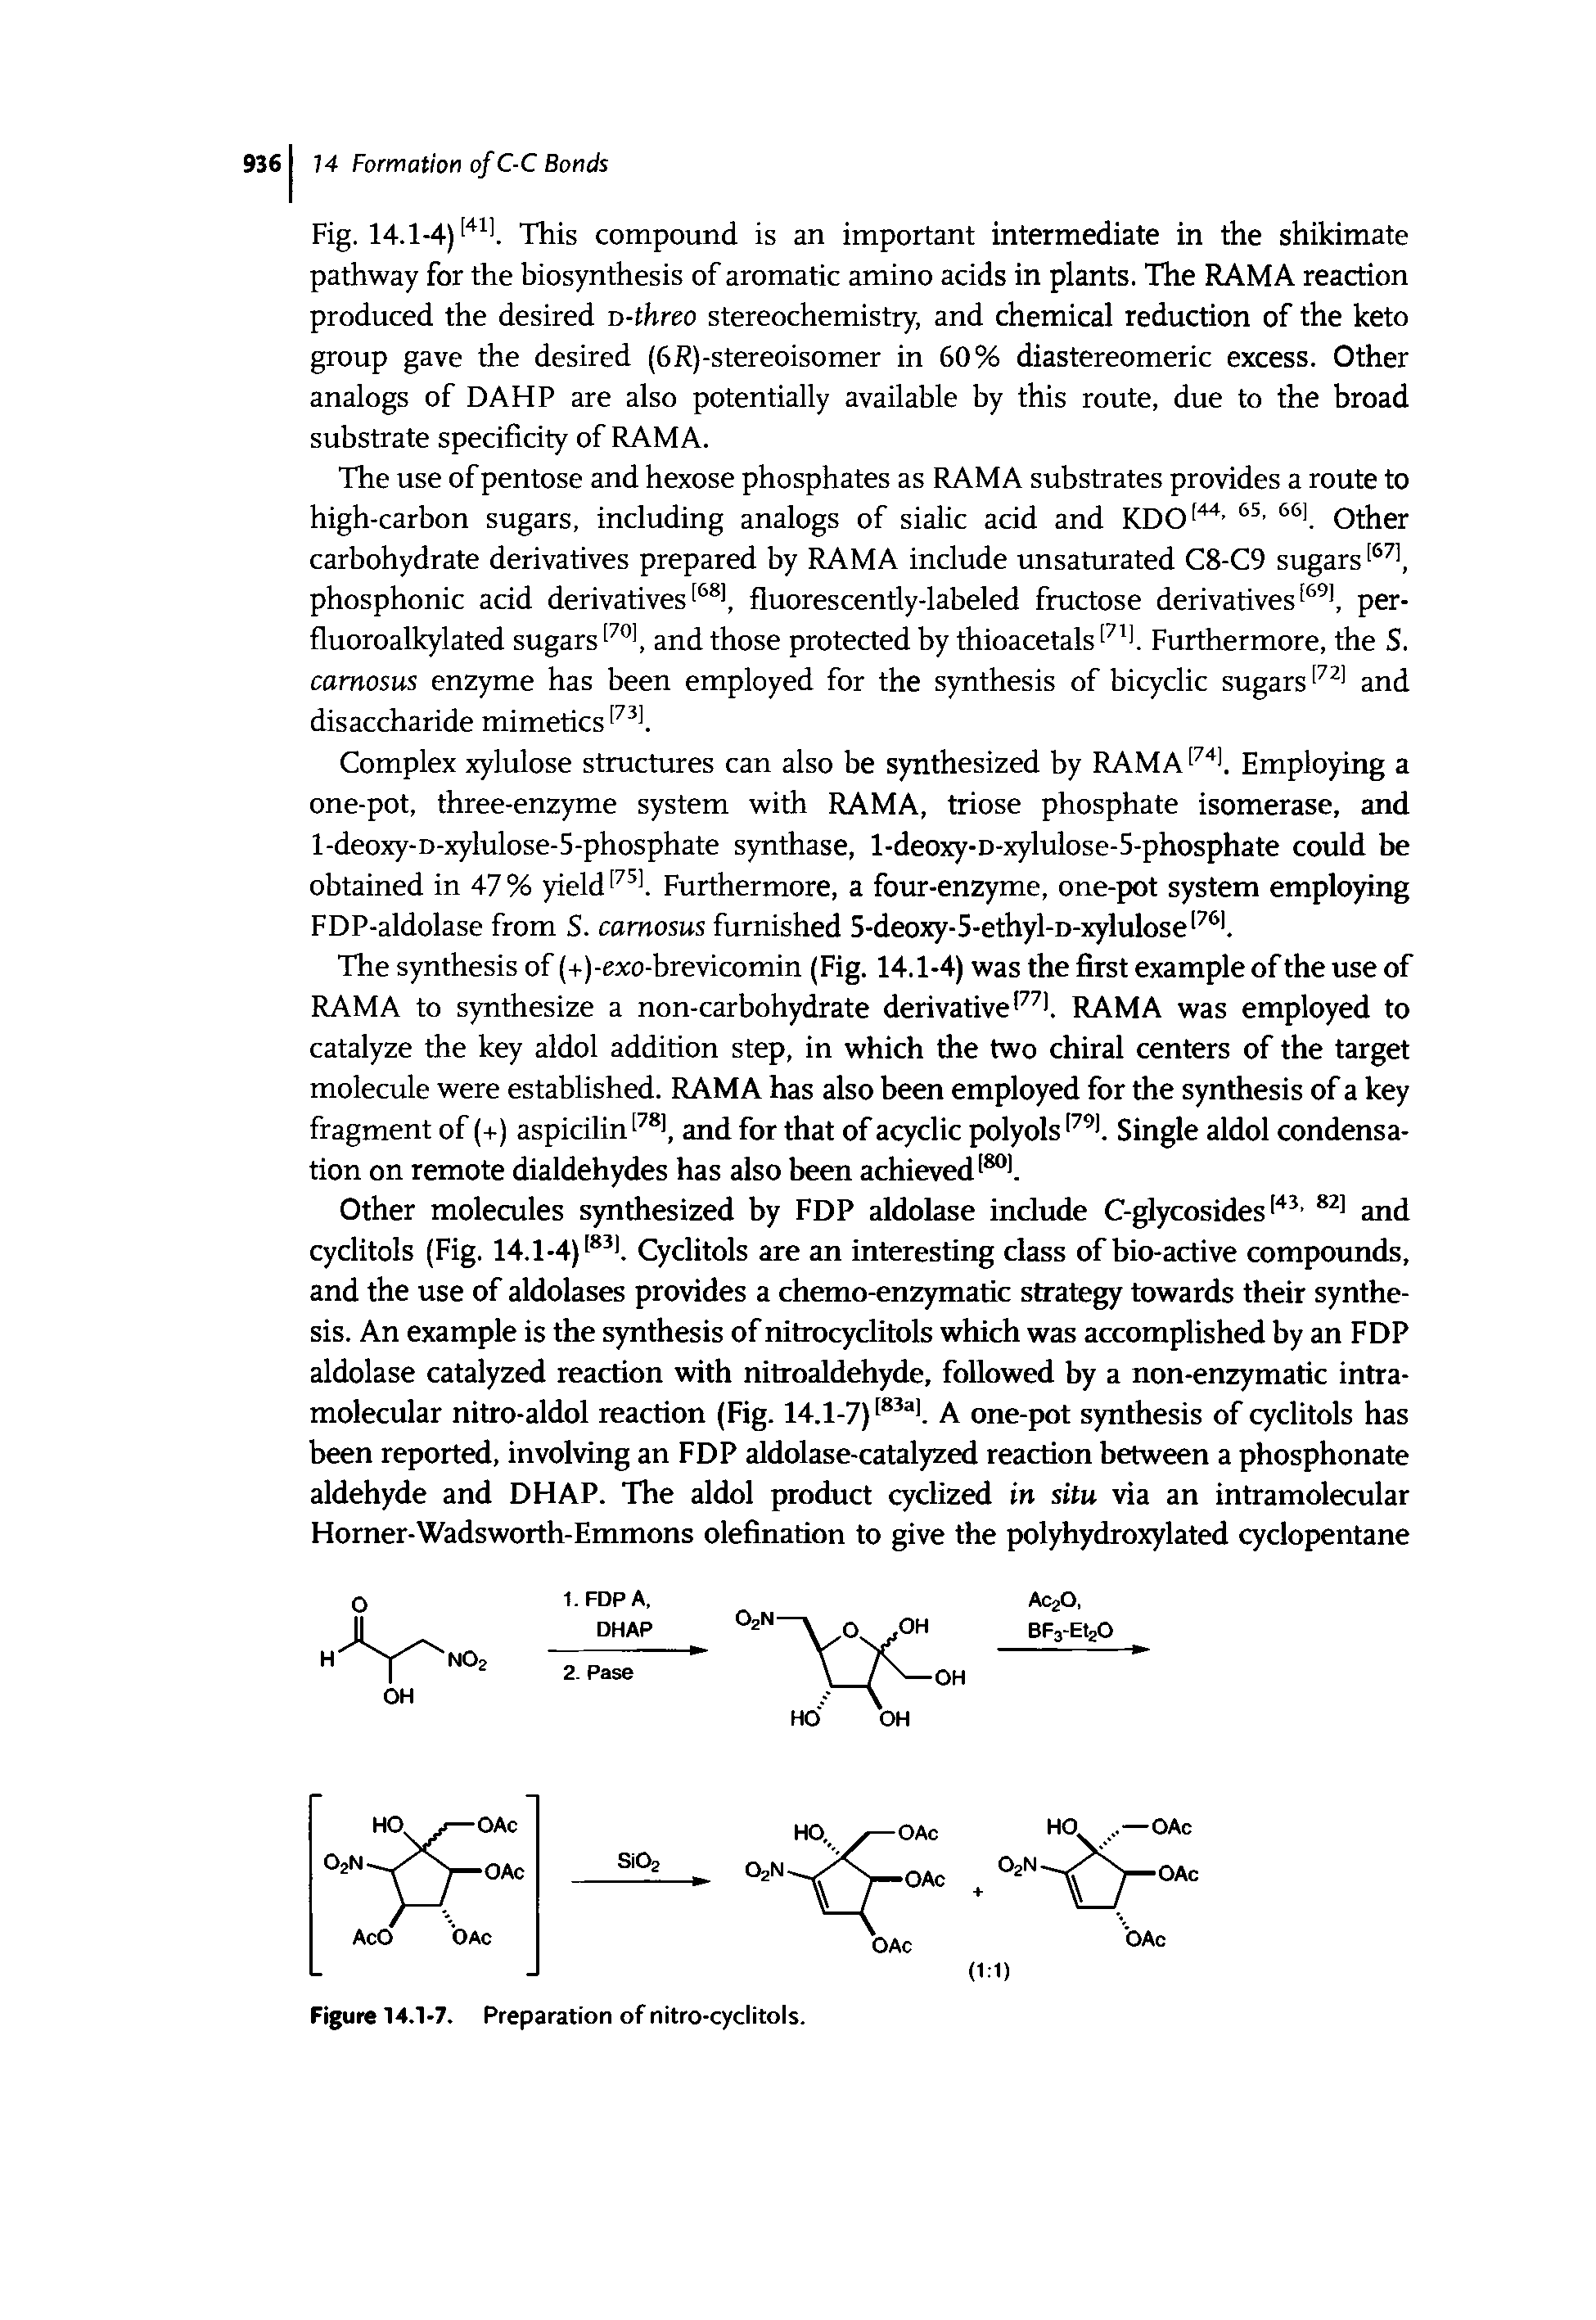 Fig. 14.1-4)[411. This compound is an important intermediate in the shikimate pathway for the biosynthesis of aromatic amino acids in plants. The RAMA reaction produced the desired d-threo stereochemistry, and chemical reduction of the keto group gave the desired (6R)-stereoisomer in 60% diastereomeric excess. Other analogs of DAHP are also potentially available by this route, due to the broad substrate specificity of RAMA.